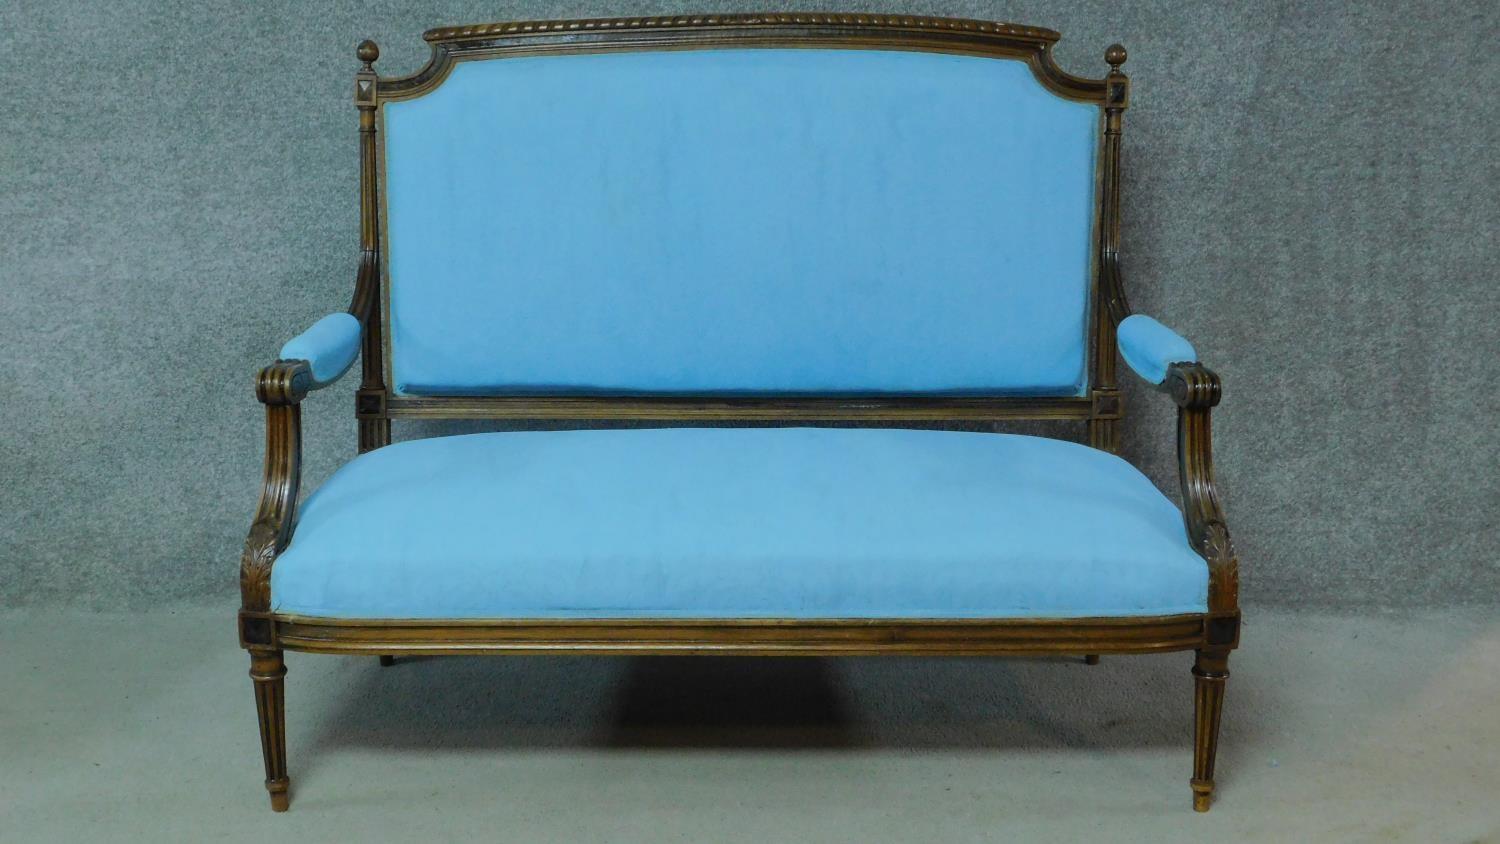 A 19th century French walnut canape in pale turquoise fabric painted upholstery. H.108 W.130 D.65cm